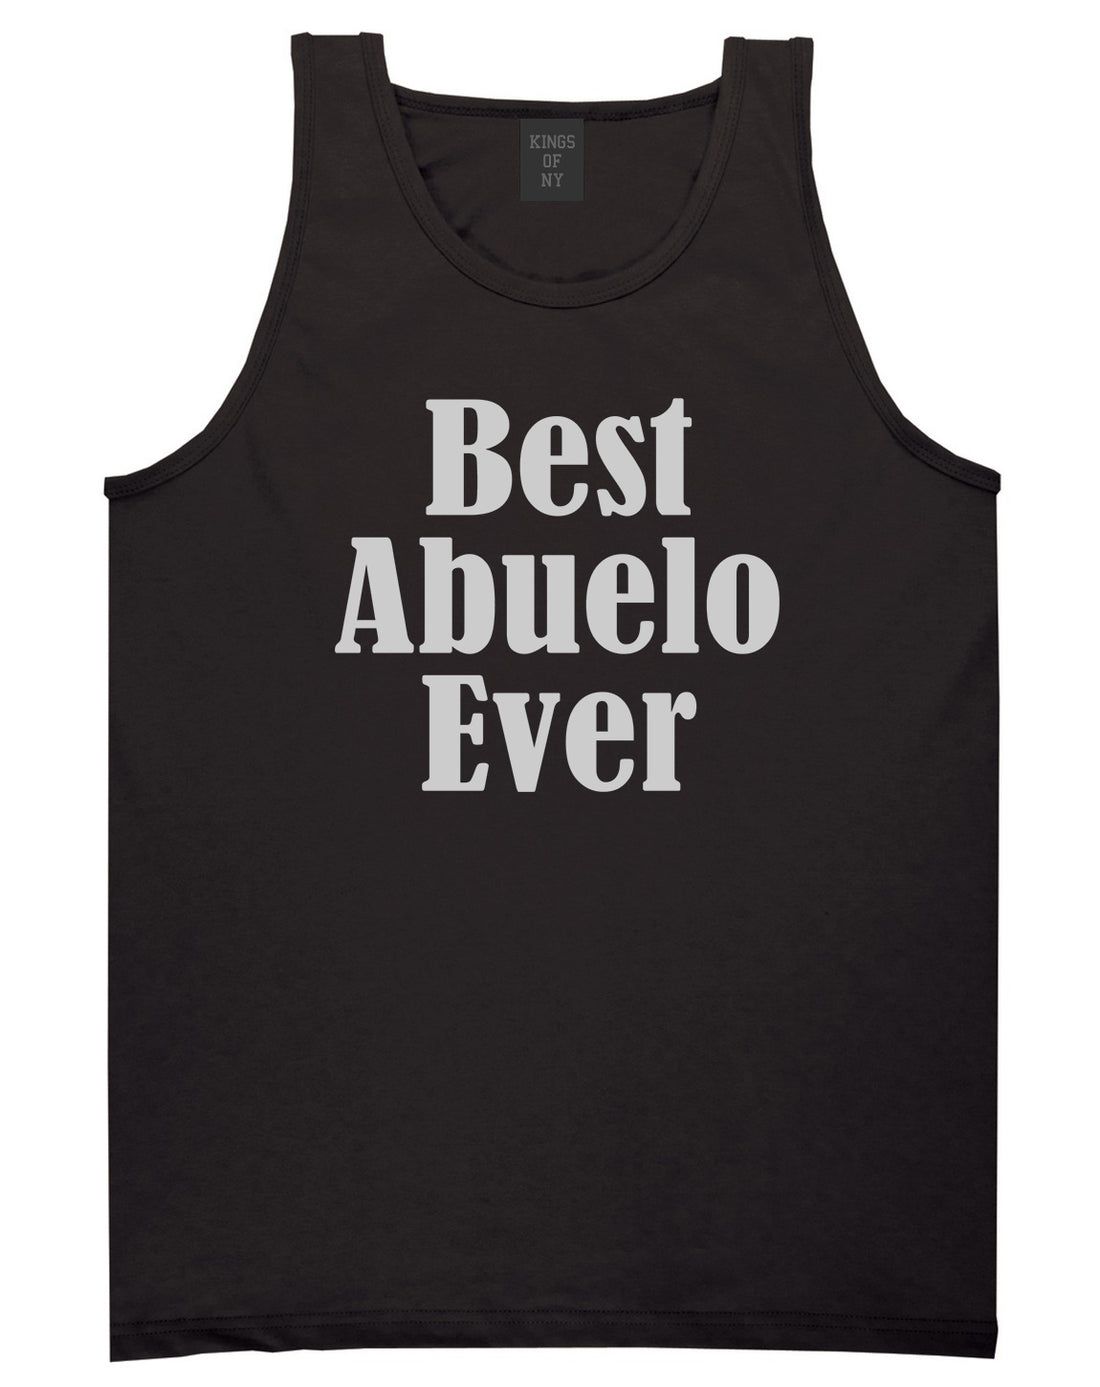 Best Abuelo Ever Grandpa Spanish Fathers Day Mens Tank Top Shirt Black by Kings Of NY